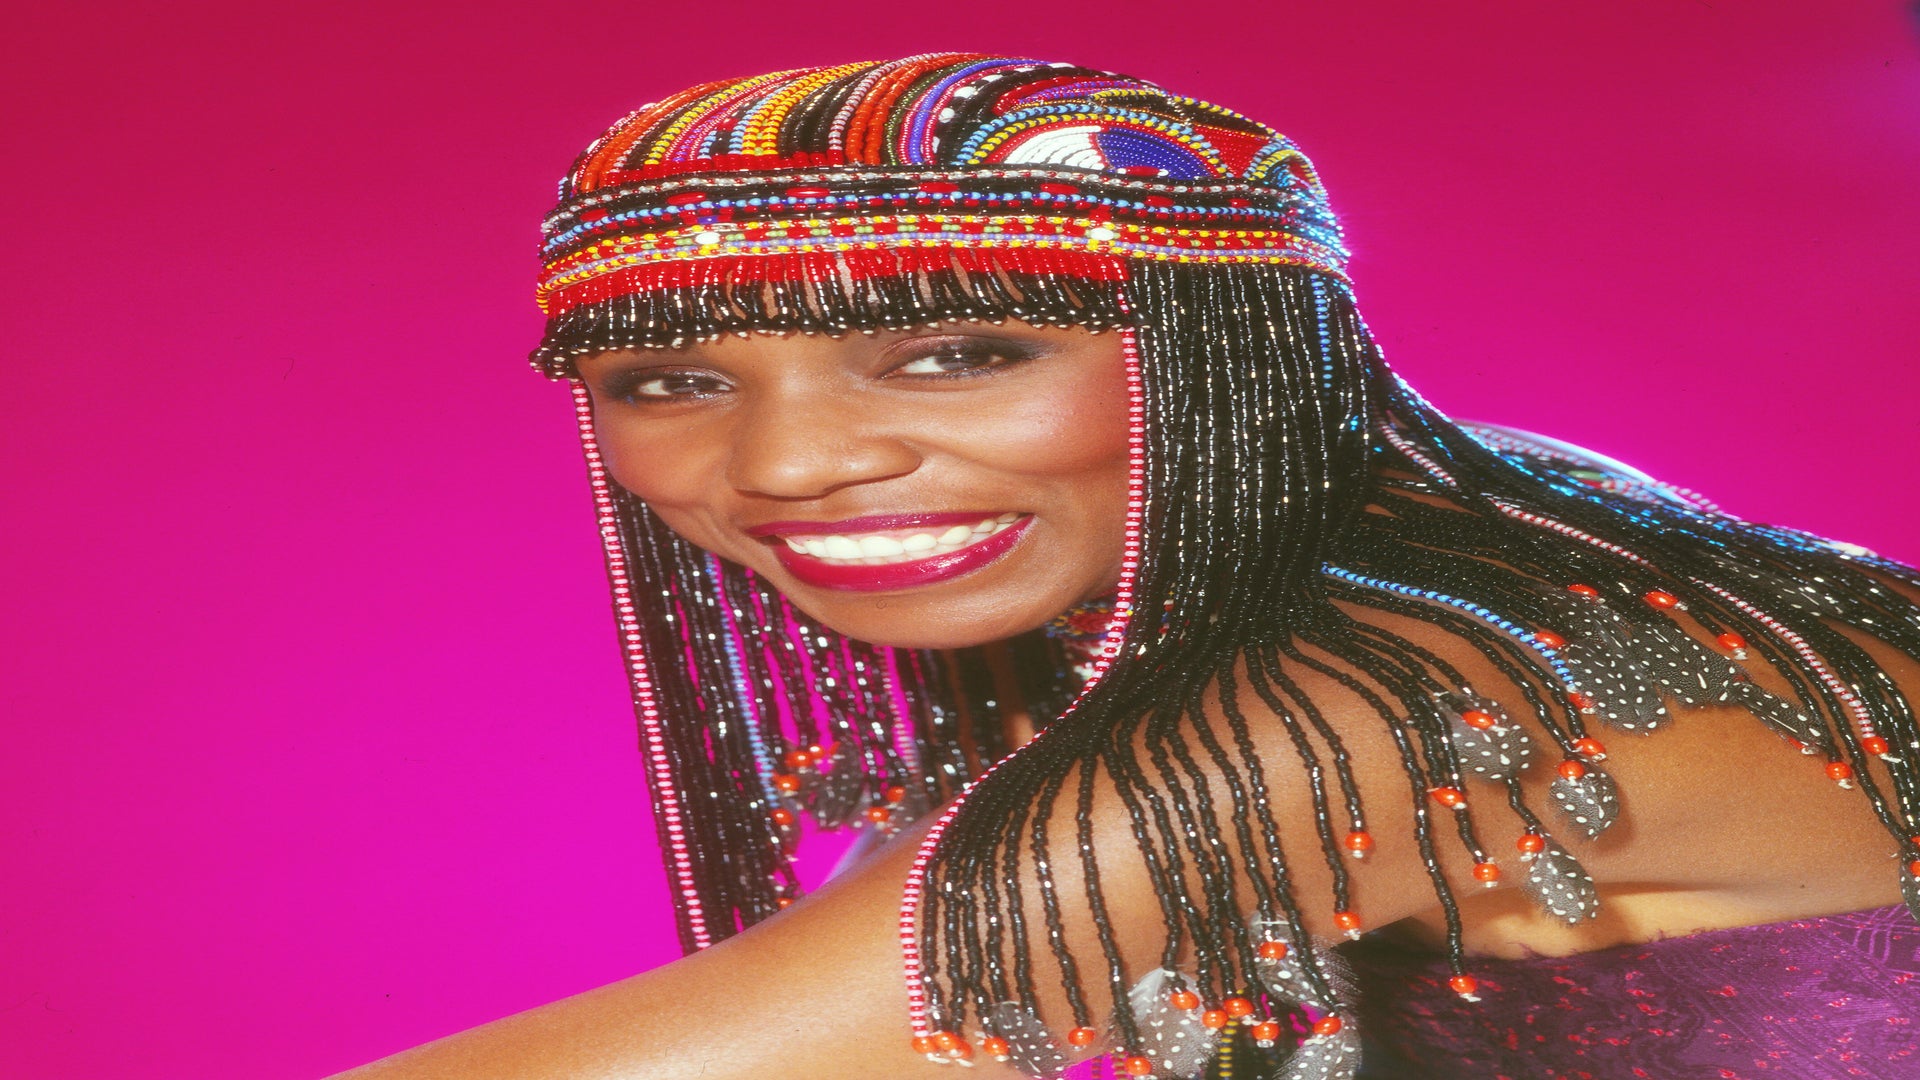 Where Are They Now? Black Female Performers From The '80s - Essence